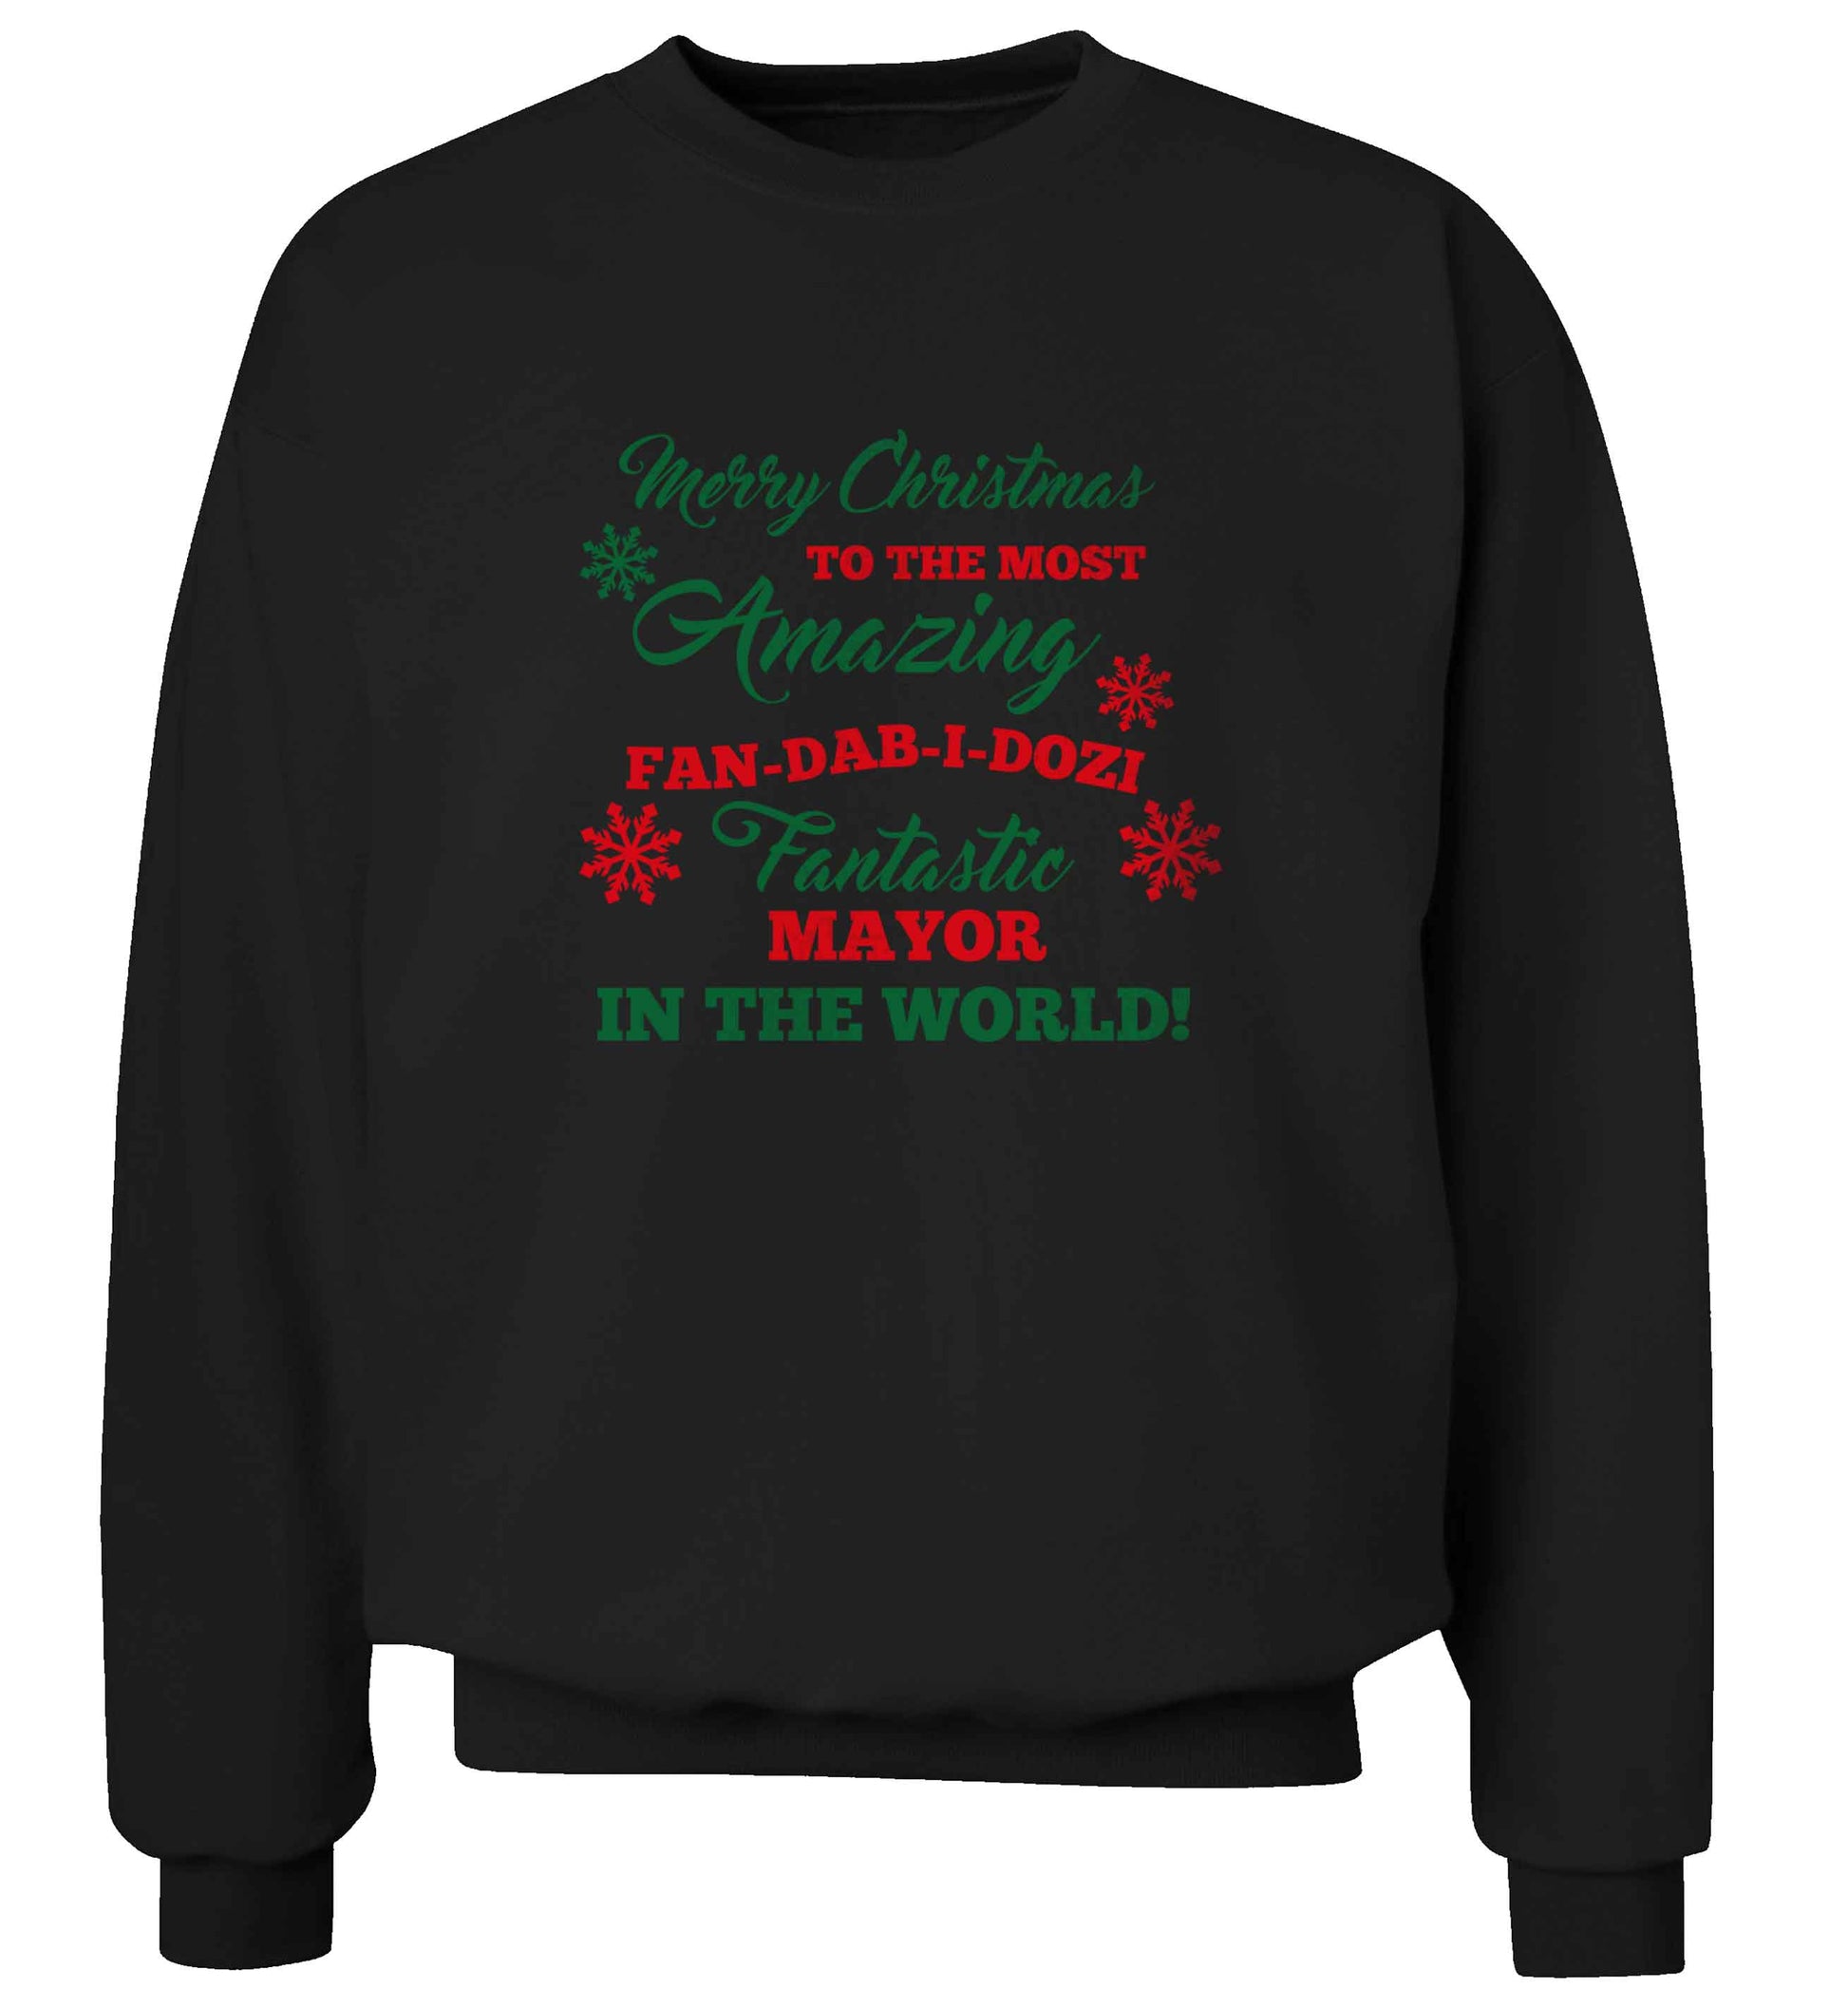 Merry Christmas to the most amazing fireman in the world! adult's unisex black sweater 2XL